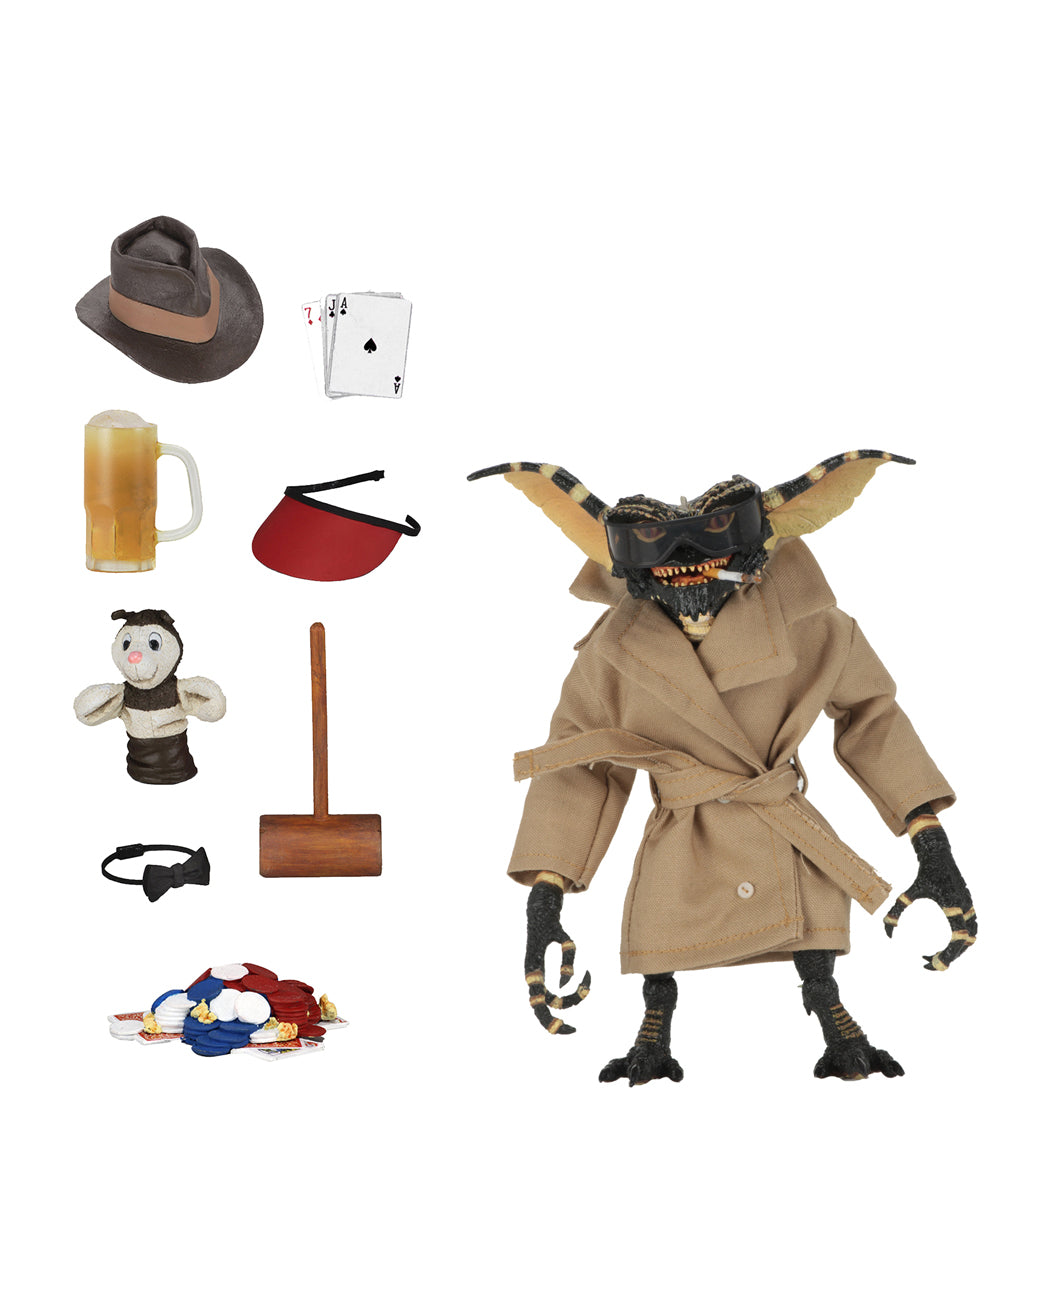 NECA - Gremlins - Ultimate Flasher 7" Action Figure - Zlc Collectibles